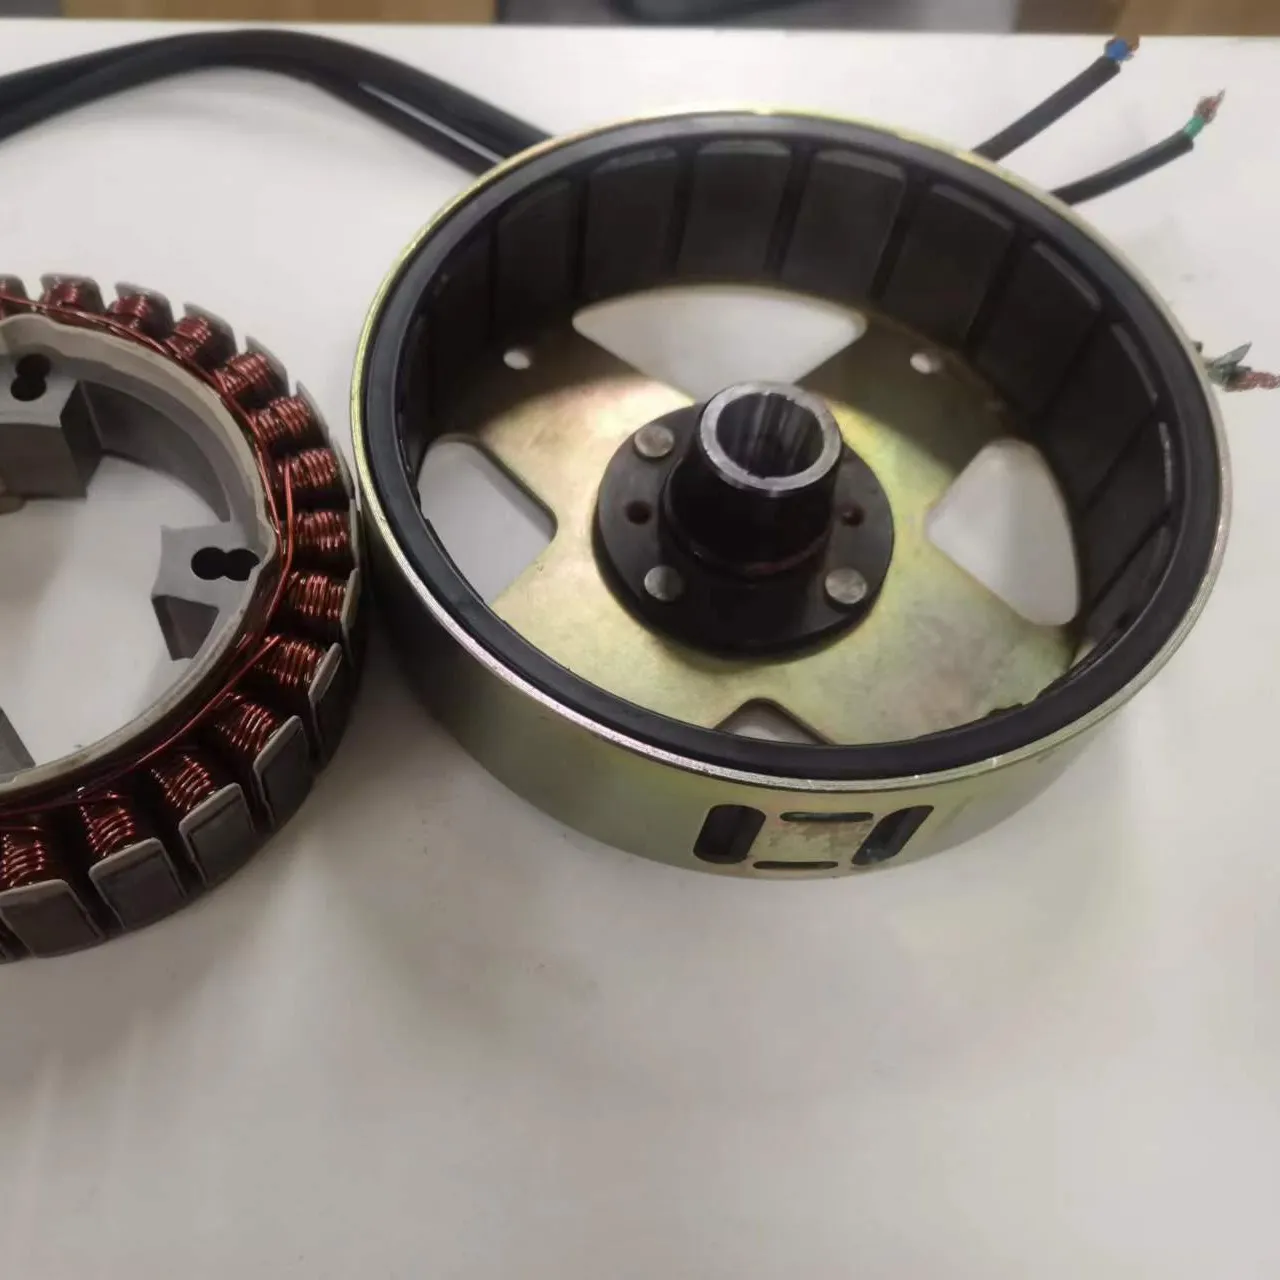 YP, Yuxin high power High speed motor stamping 4KW 60V Range Extender Parts Stator and Rotor for Bldc motor 1KW to 15KW